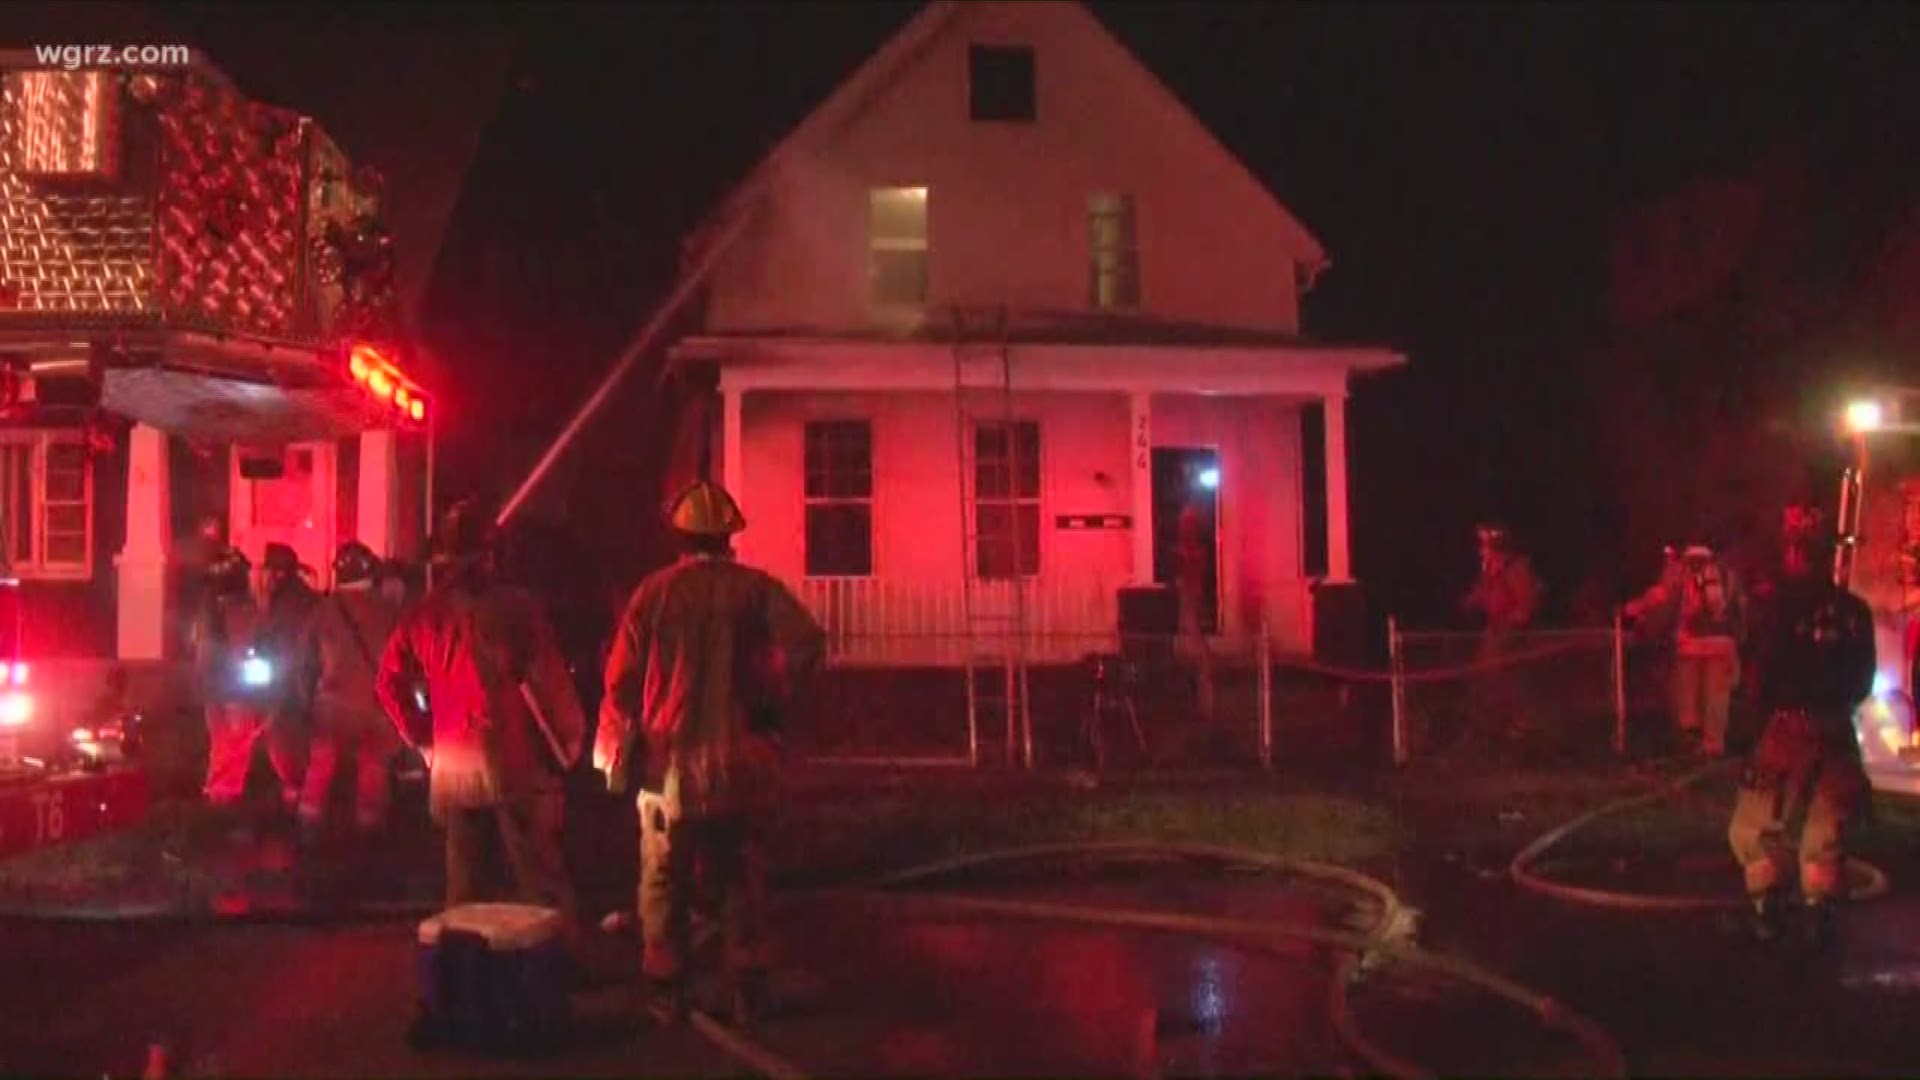 Buffalo Fire crews were called to the scene of a fire on Purdy Street around 4 a.m. Thursday